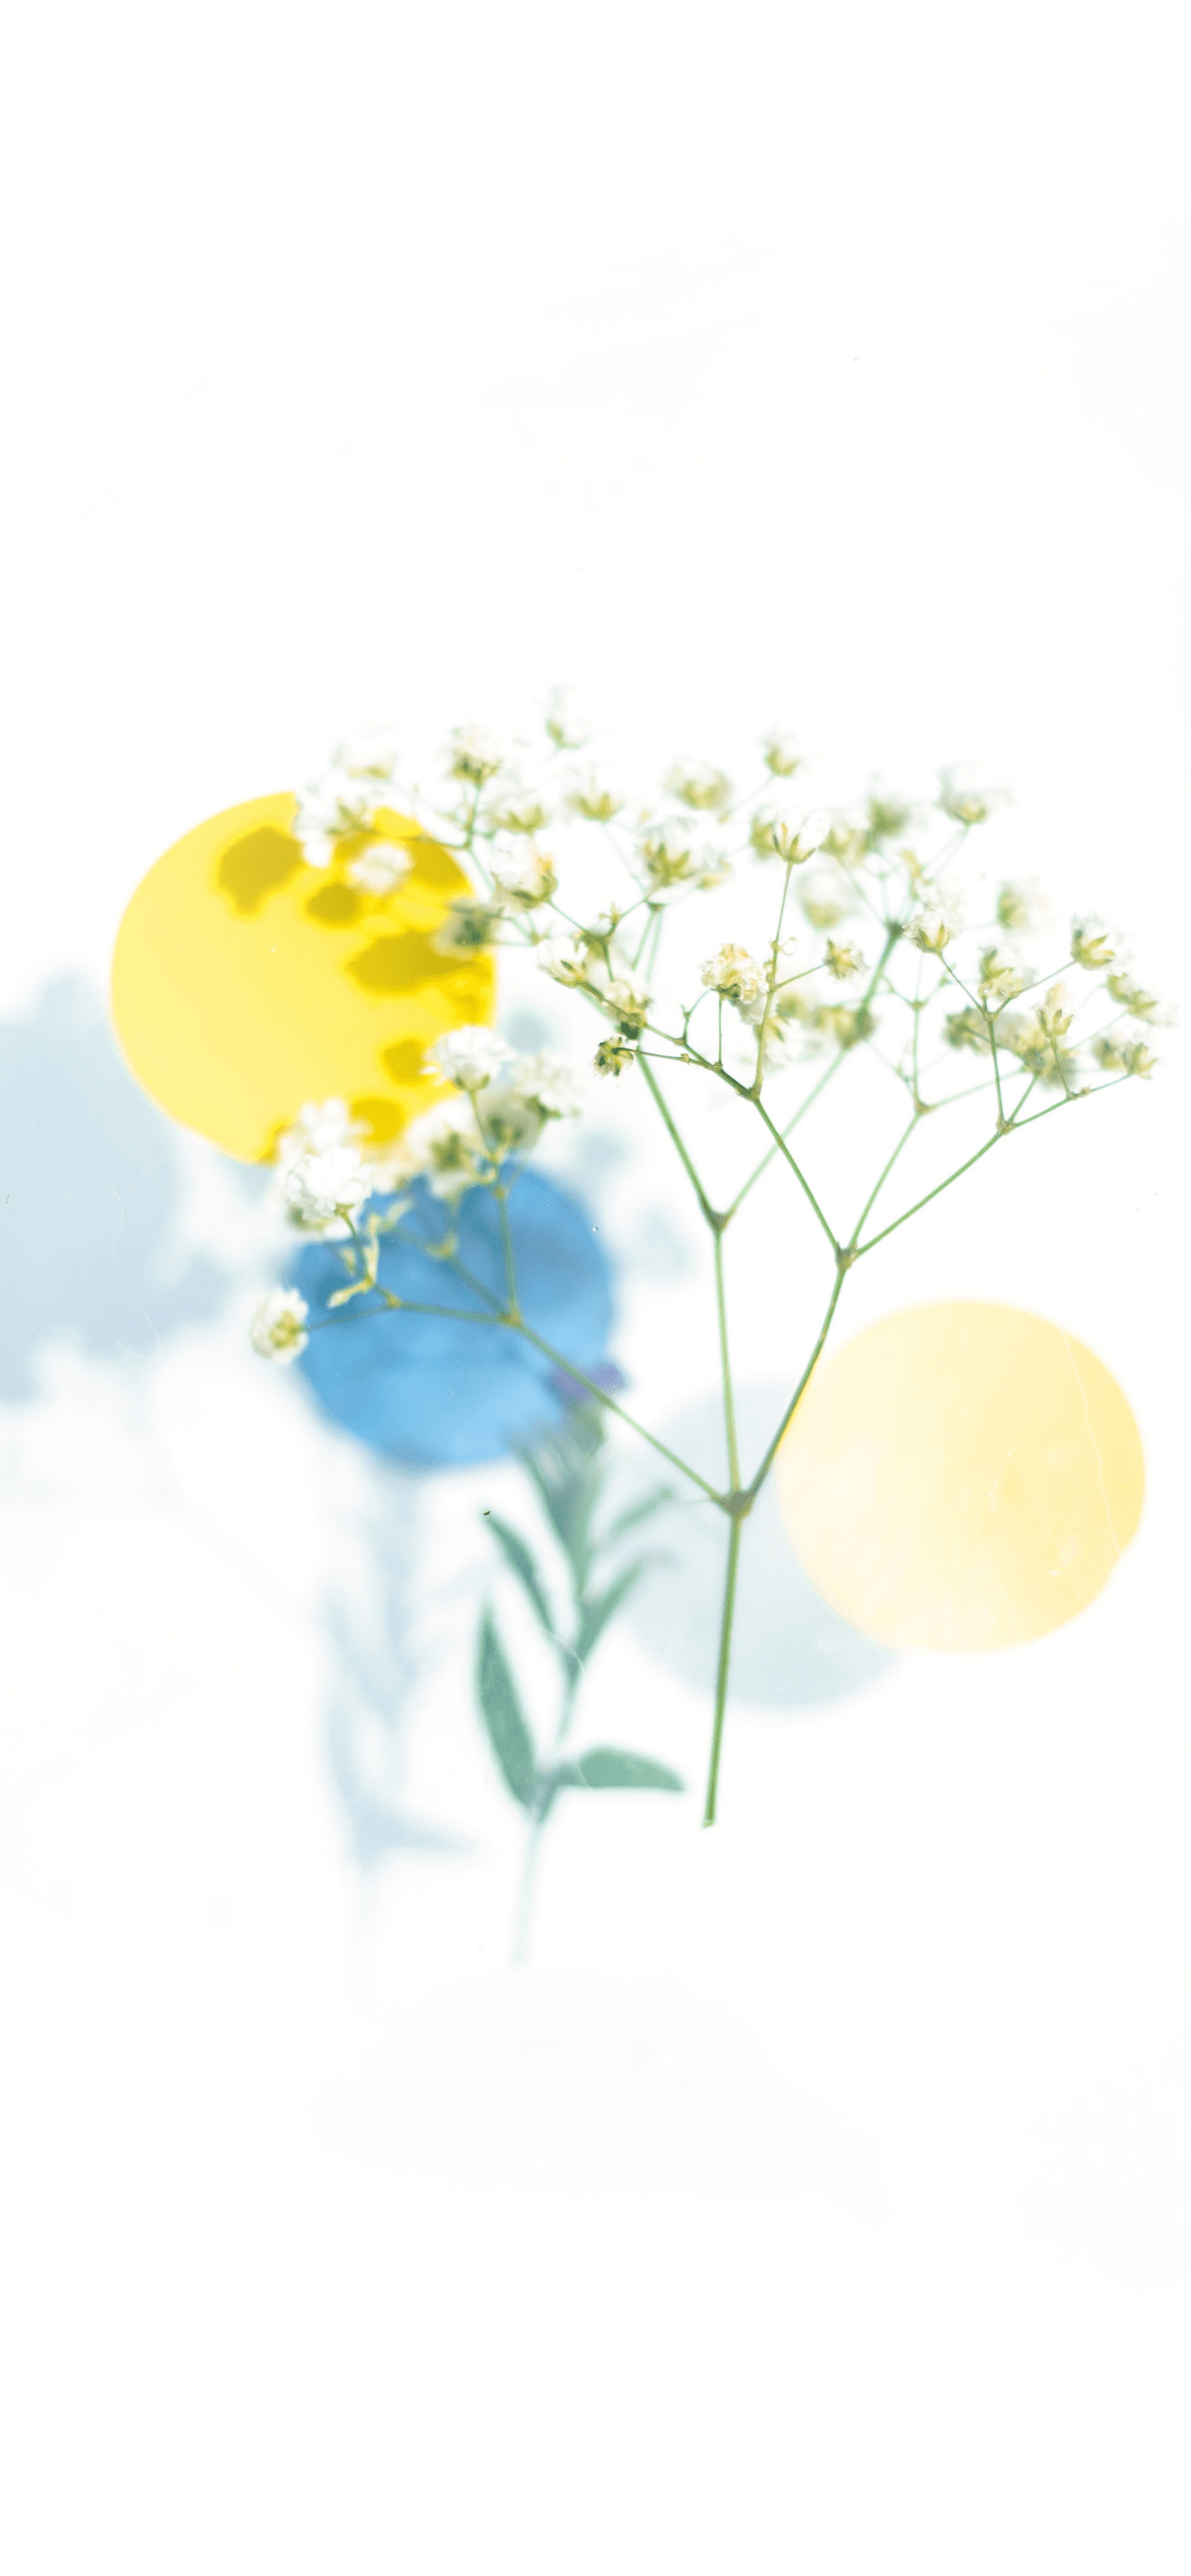 A close-up of a gypsophila plant with yellow and blue circles in the foreground. - Art